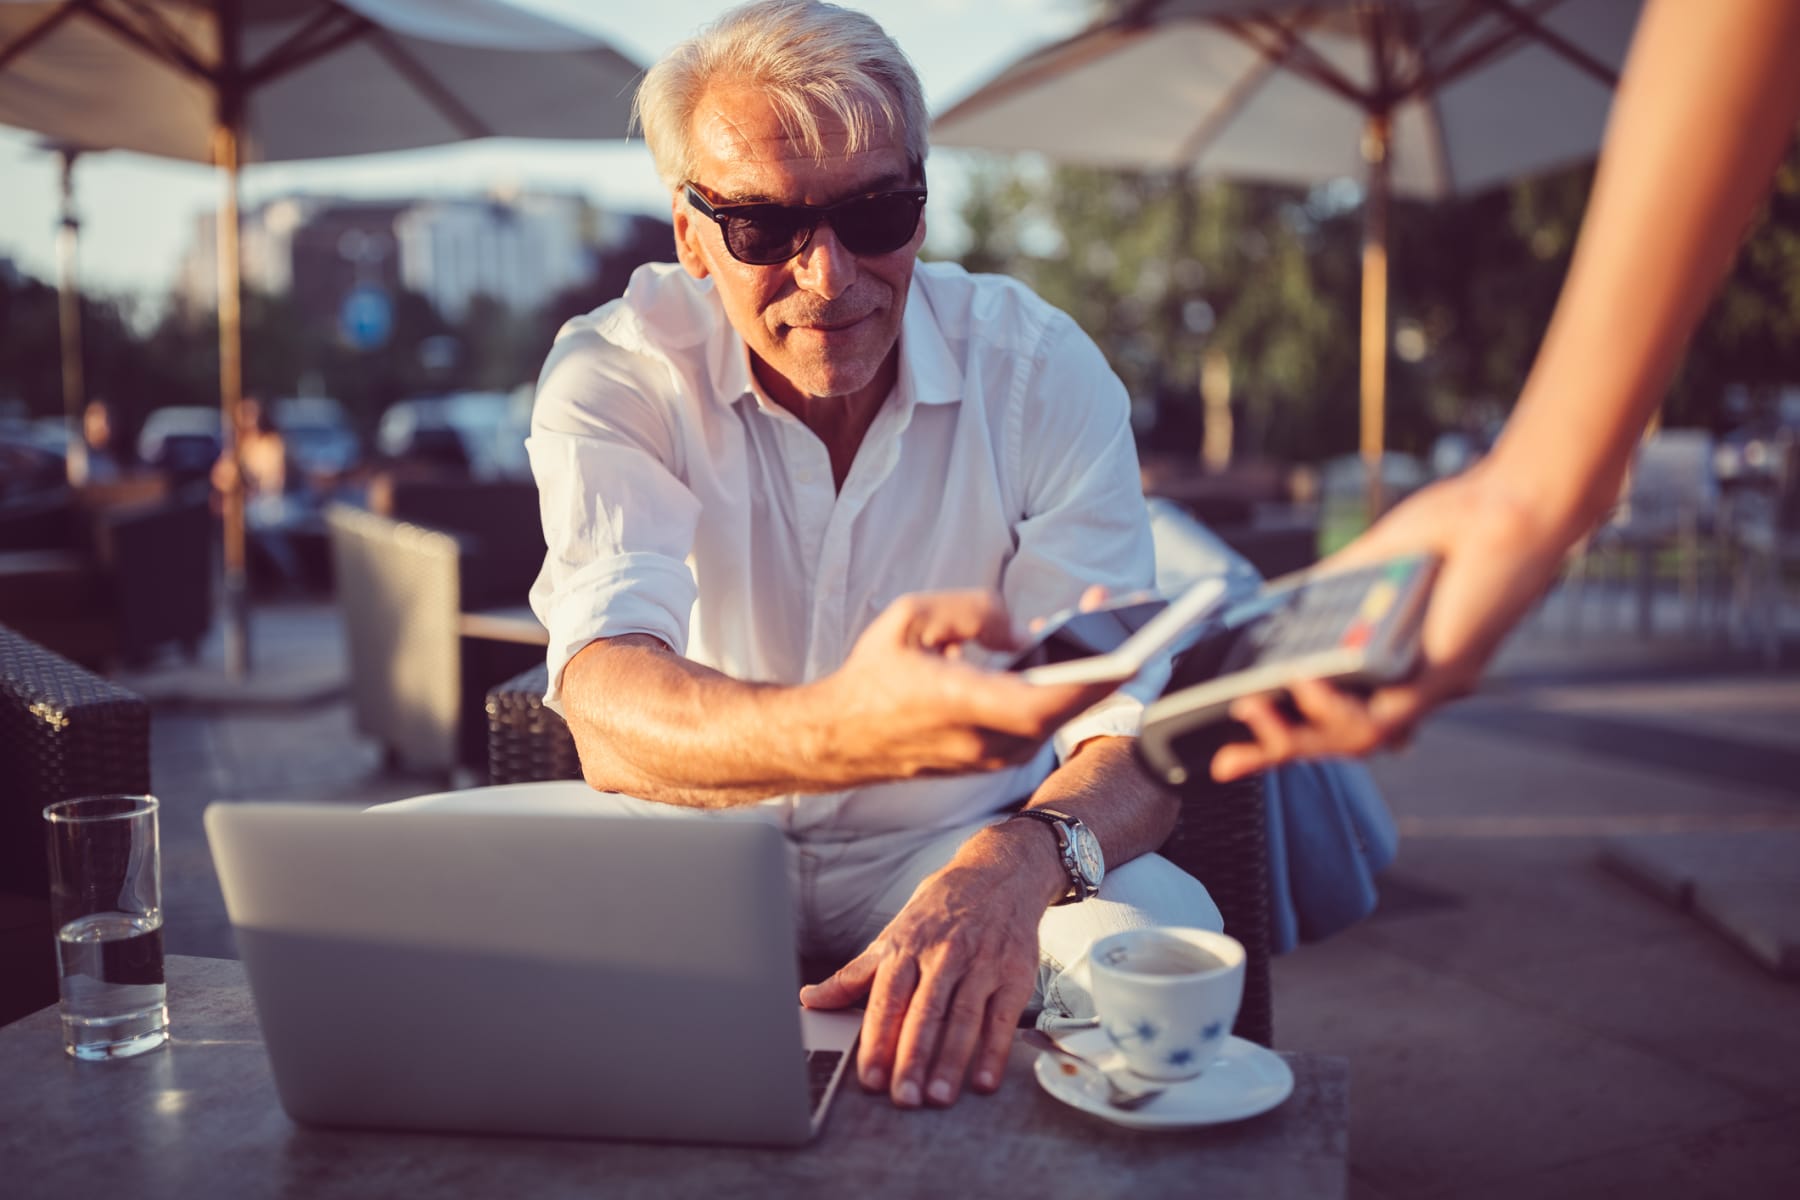 Seated outdoors, an older man in sunglasses makes a mobile payment.